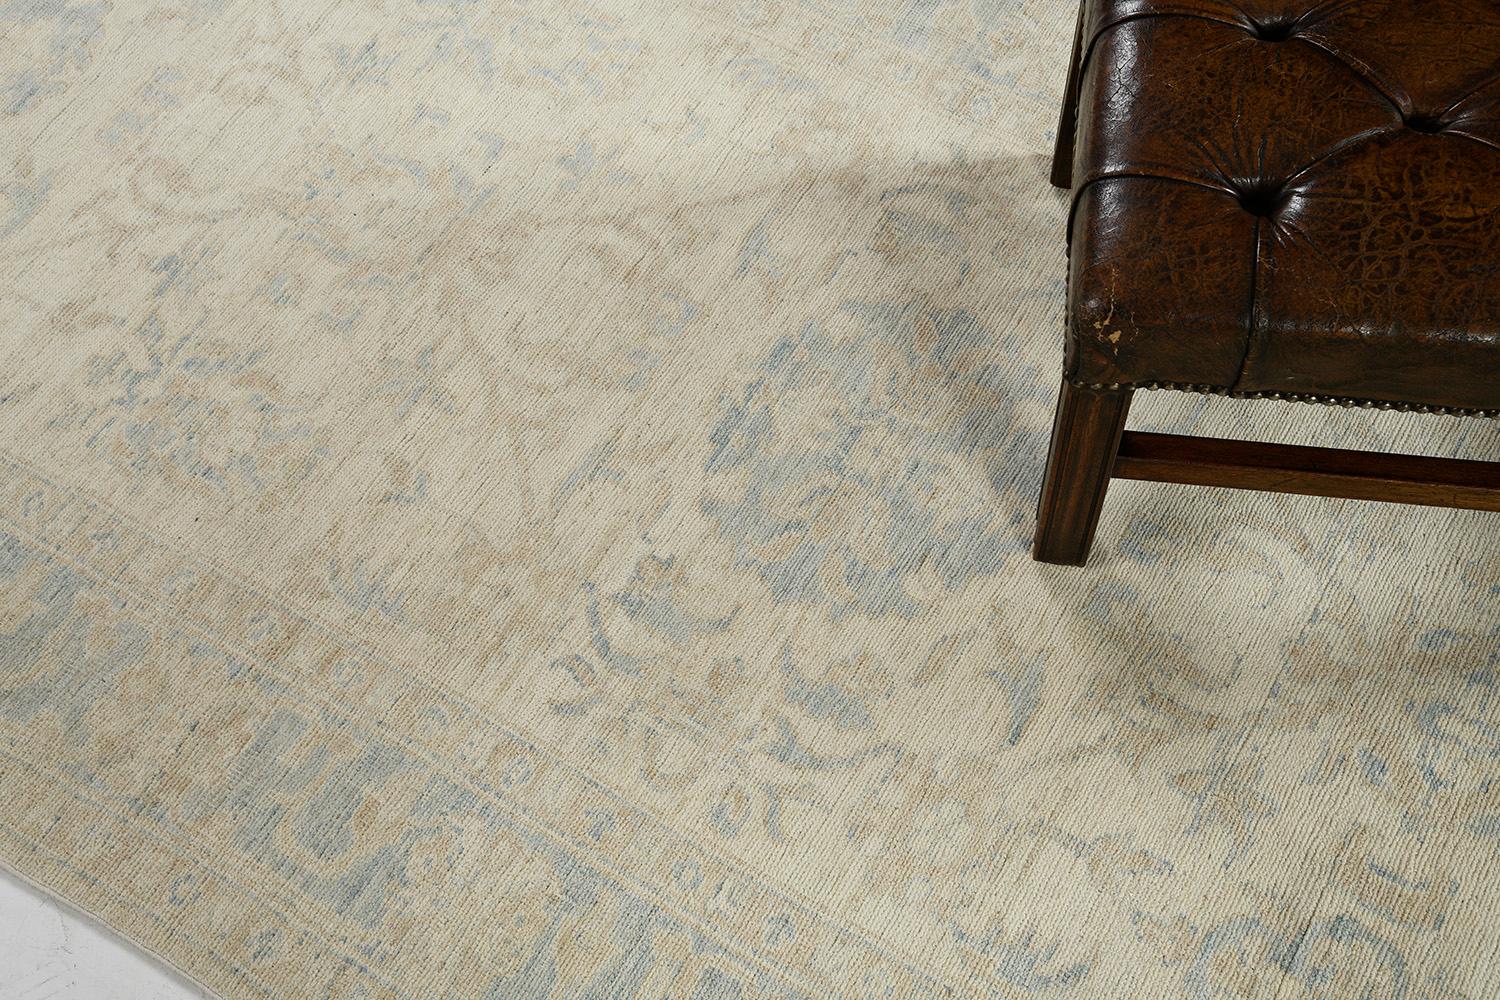 An impressive pile-woven wool Khotan design from our collection has come and flexed its versatility.  Three grandiose medallions and connecting motifs in the ash gray and sky theme dominate the entire pattern of the rug. Beautiful floral bands are